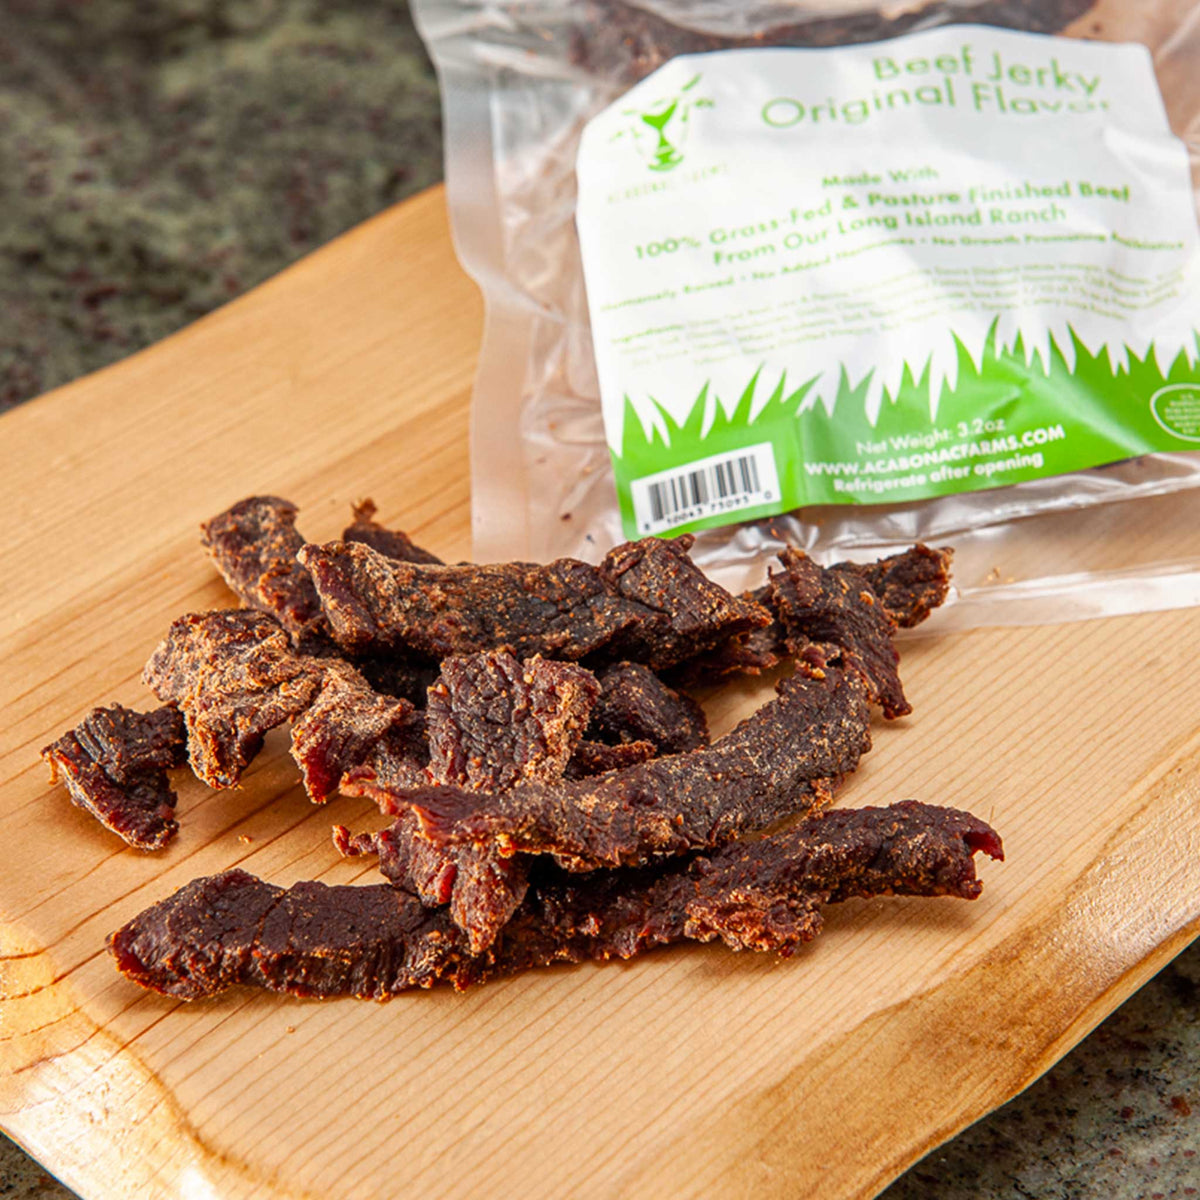 Grass-fed Beef Jerky Gift Pack